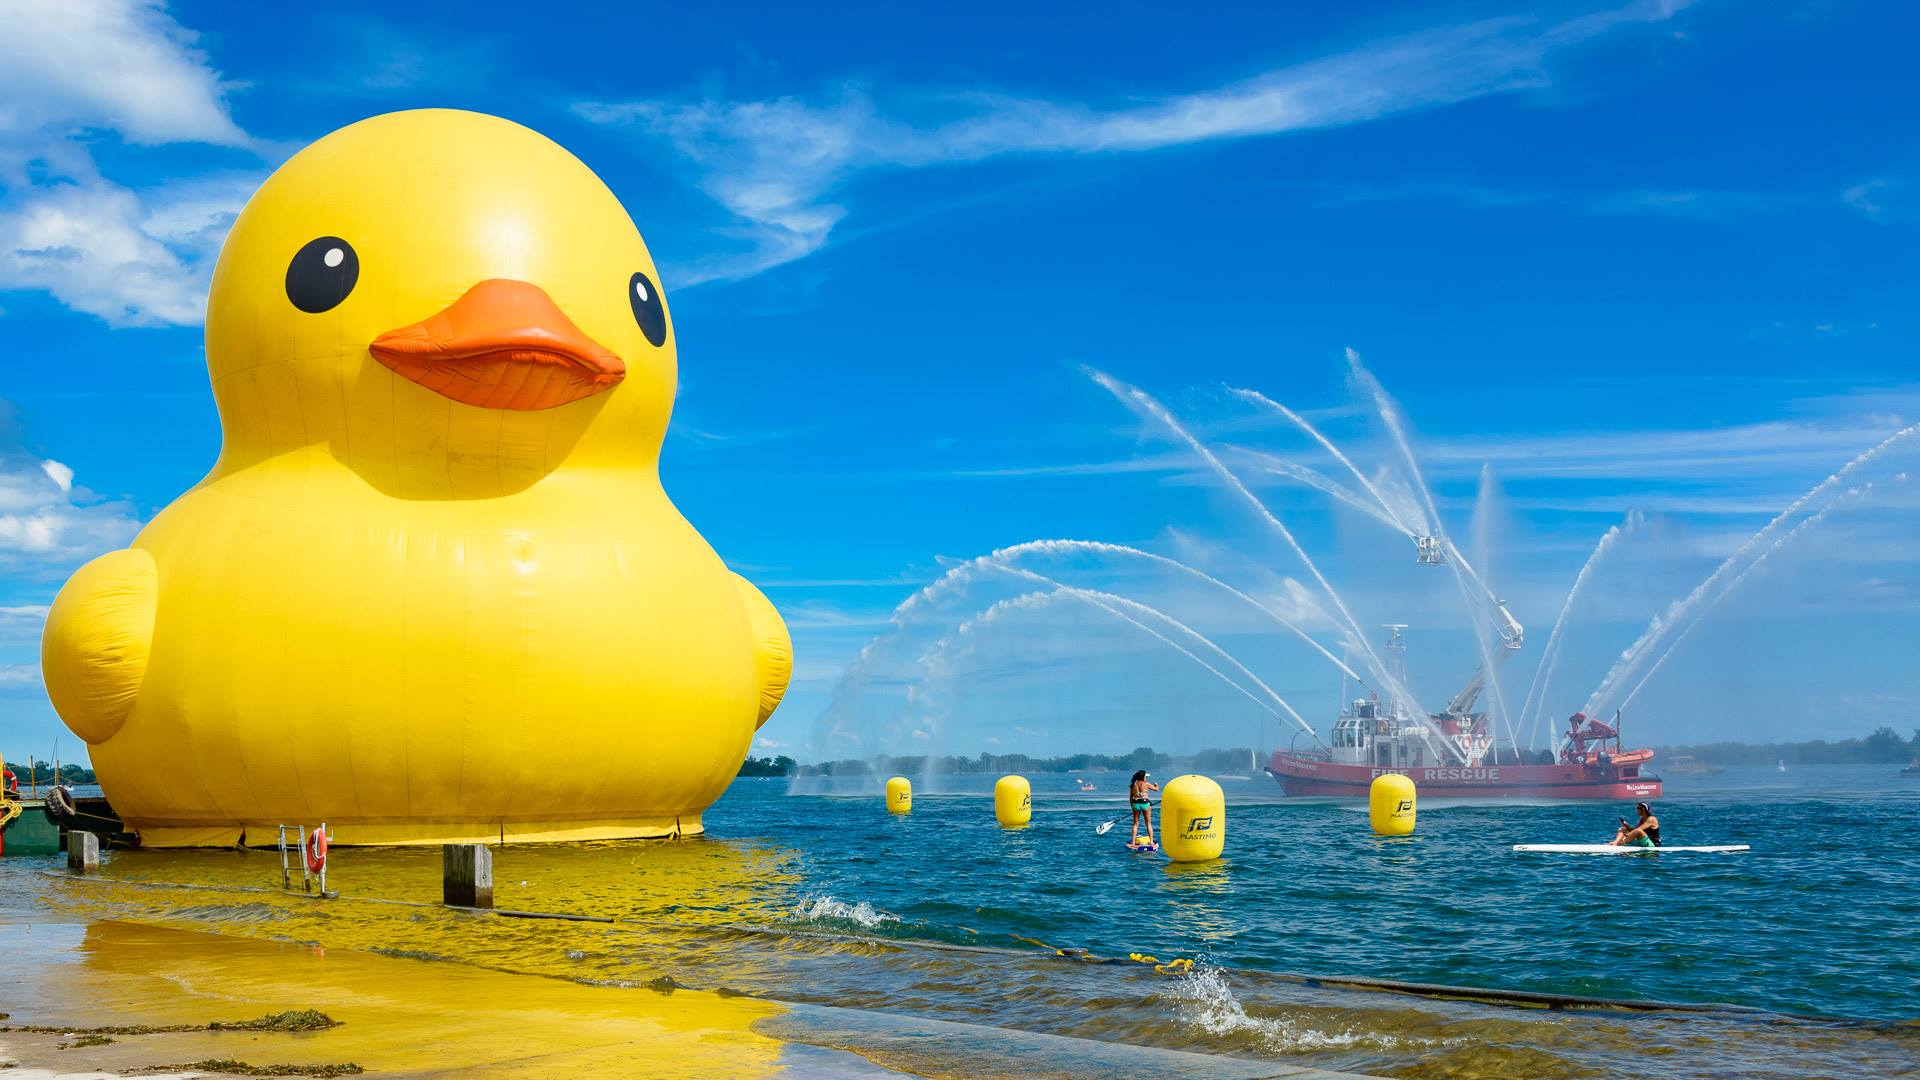 The World's Largest Rubber Duck